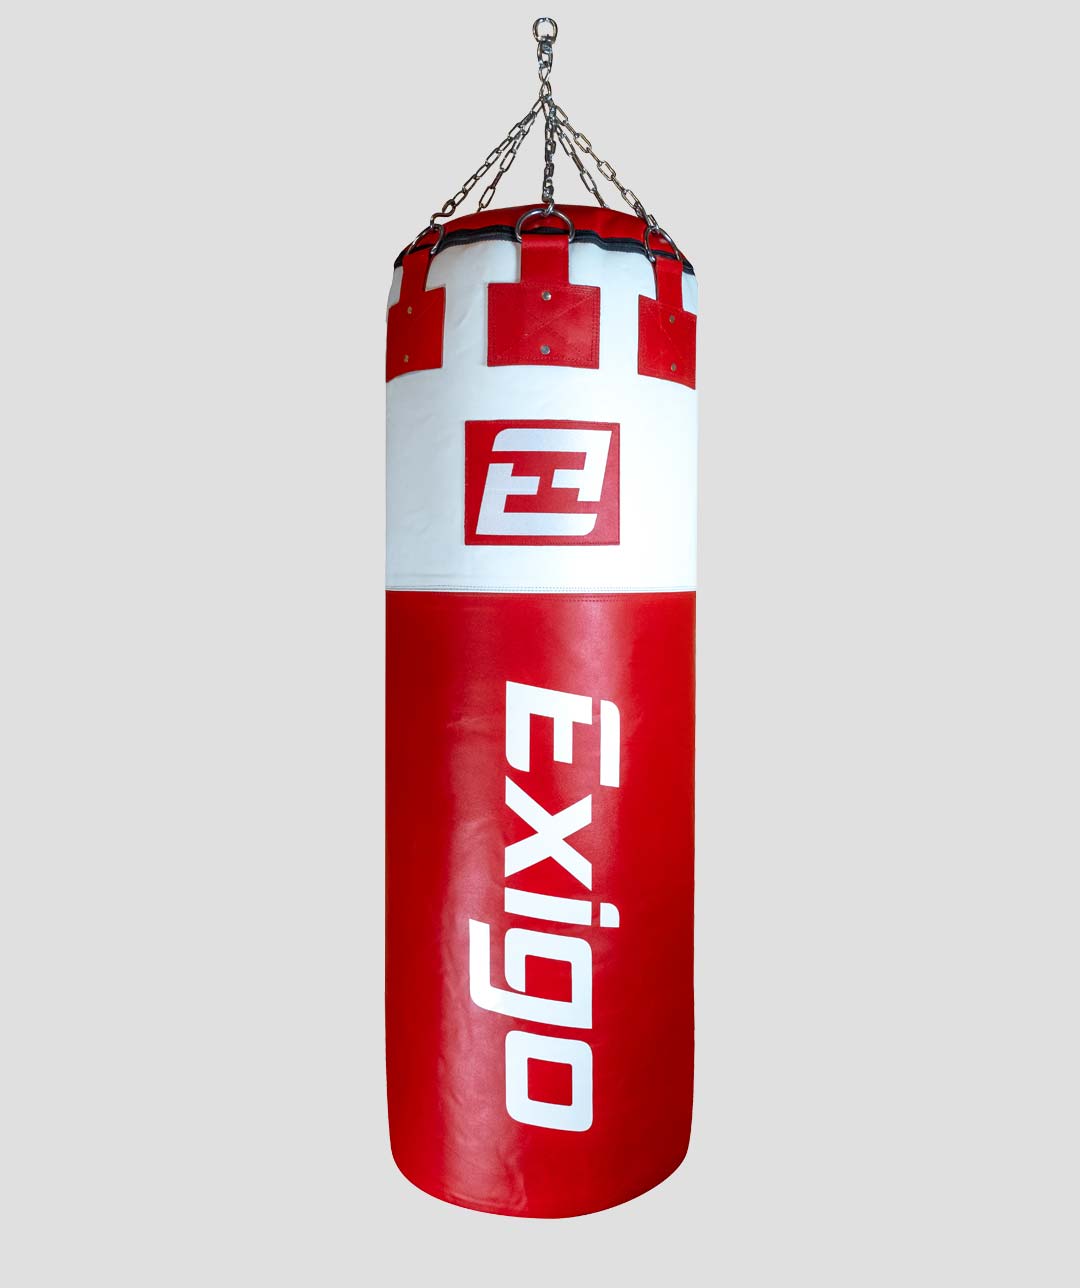 Exigo Immensus Classic Leather Punch Bag - Red/White